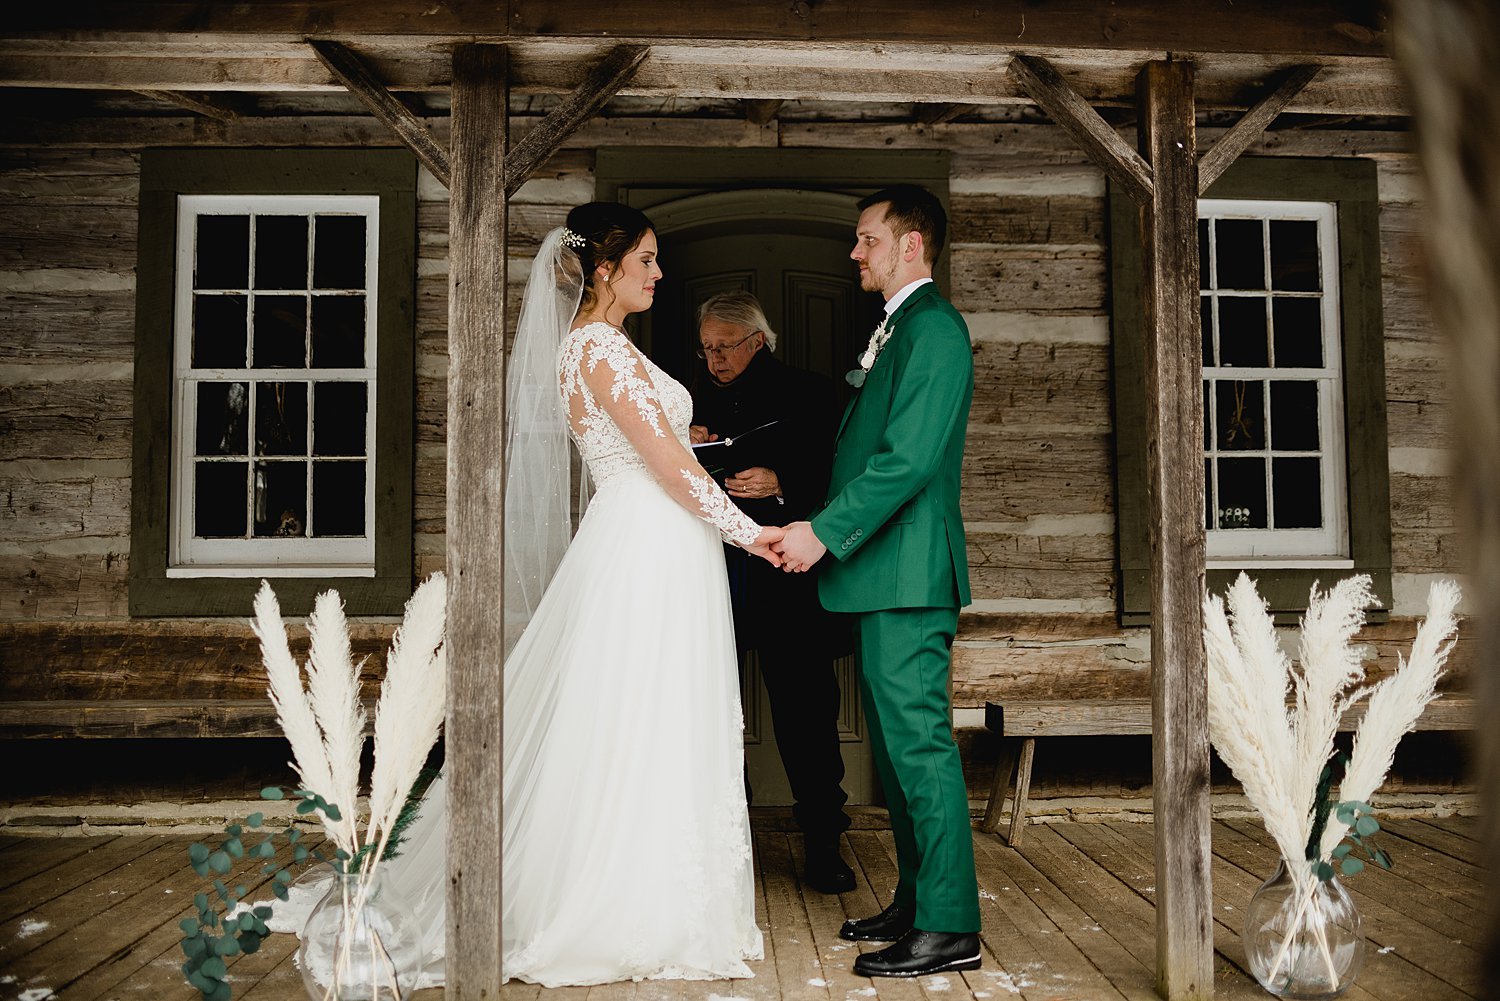 Intimate Winter Elopement at O'Hara Mill Homestead in Madoc, Ontario | Prince Edward County Wedding Photographer | Holly McMurter Photographs_0015.jpg